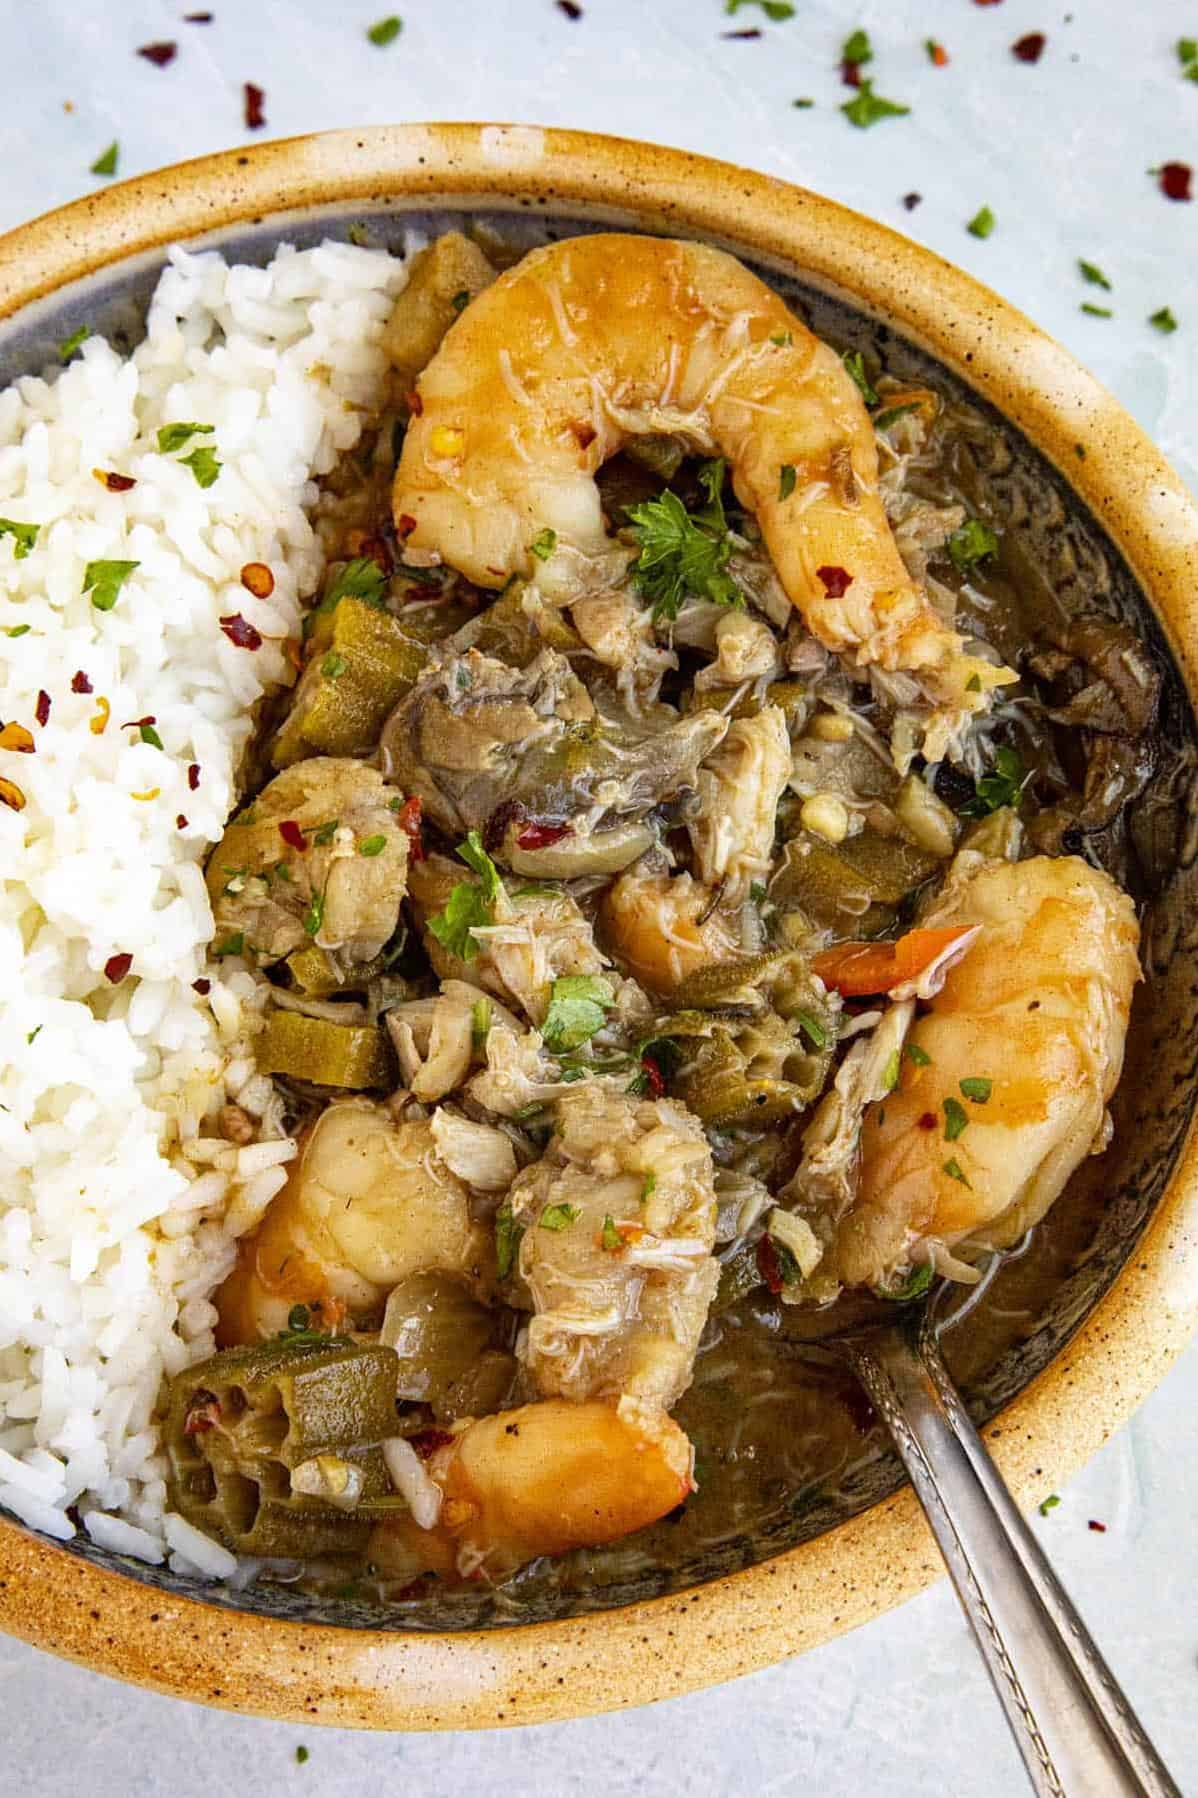  Plump and juicy shrimp and oysters swimming in a flavorful and savory bowl of gumbo